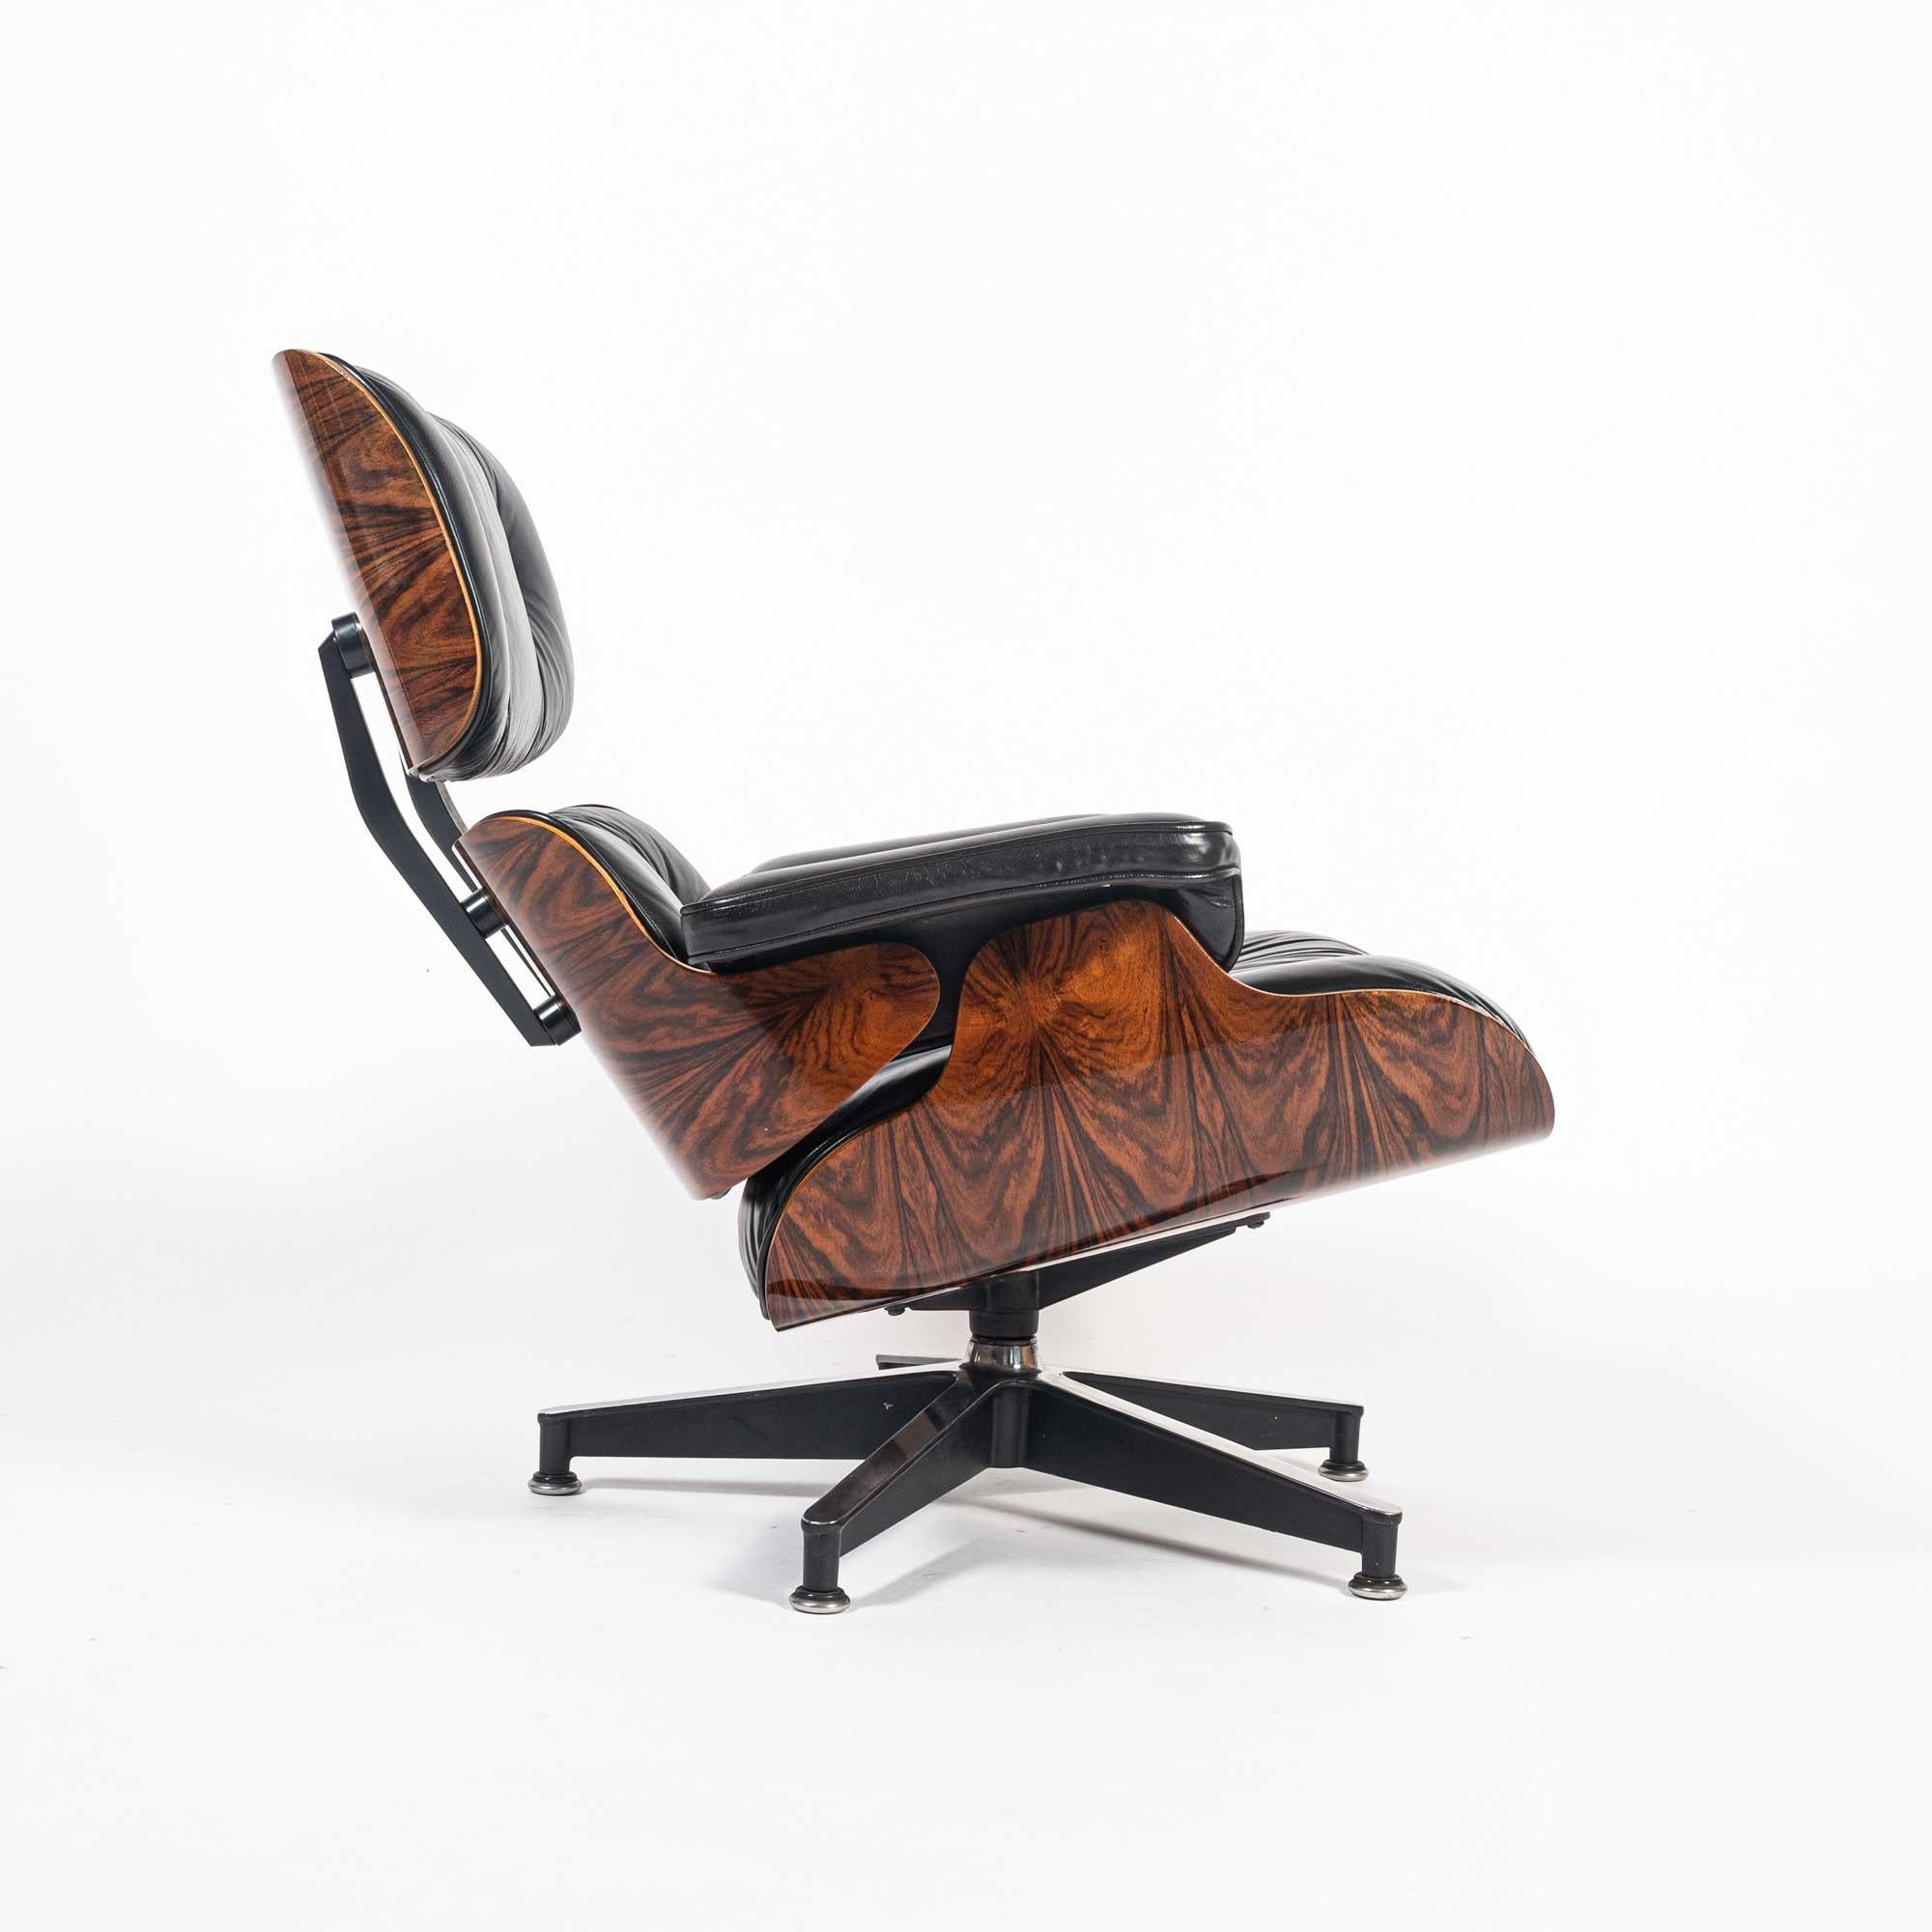 American Fully Restored 3rd Gen Eames Lounge Chair 670 and Ottoman 671 in Black Leather